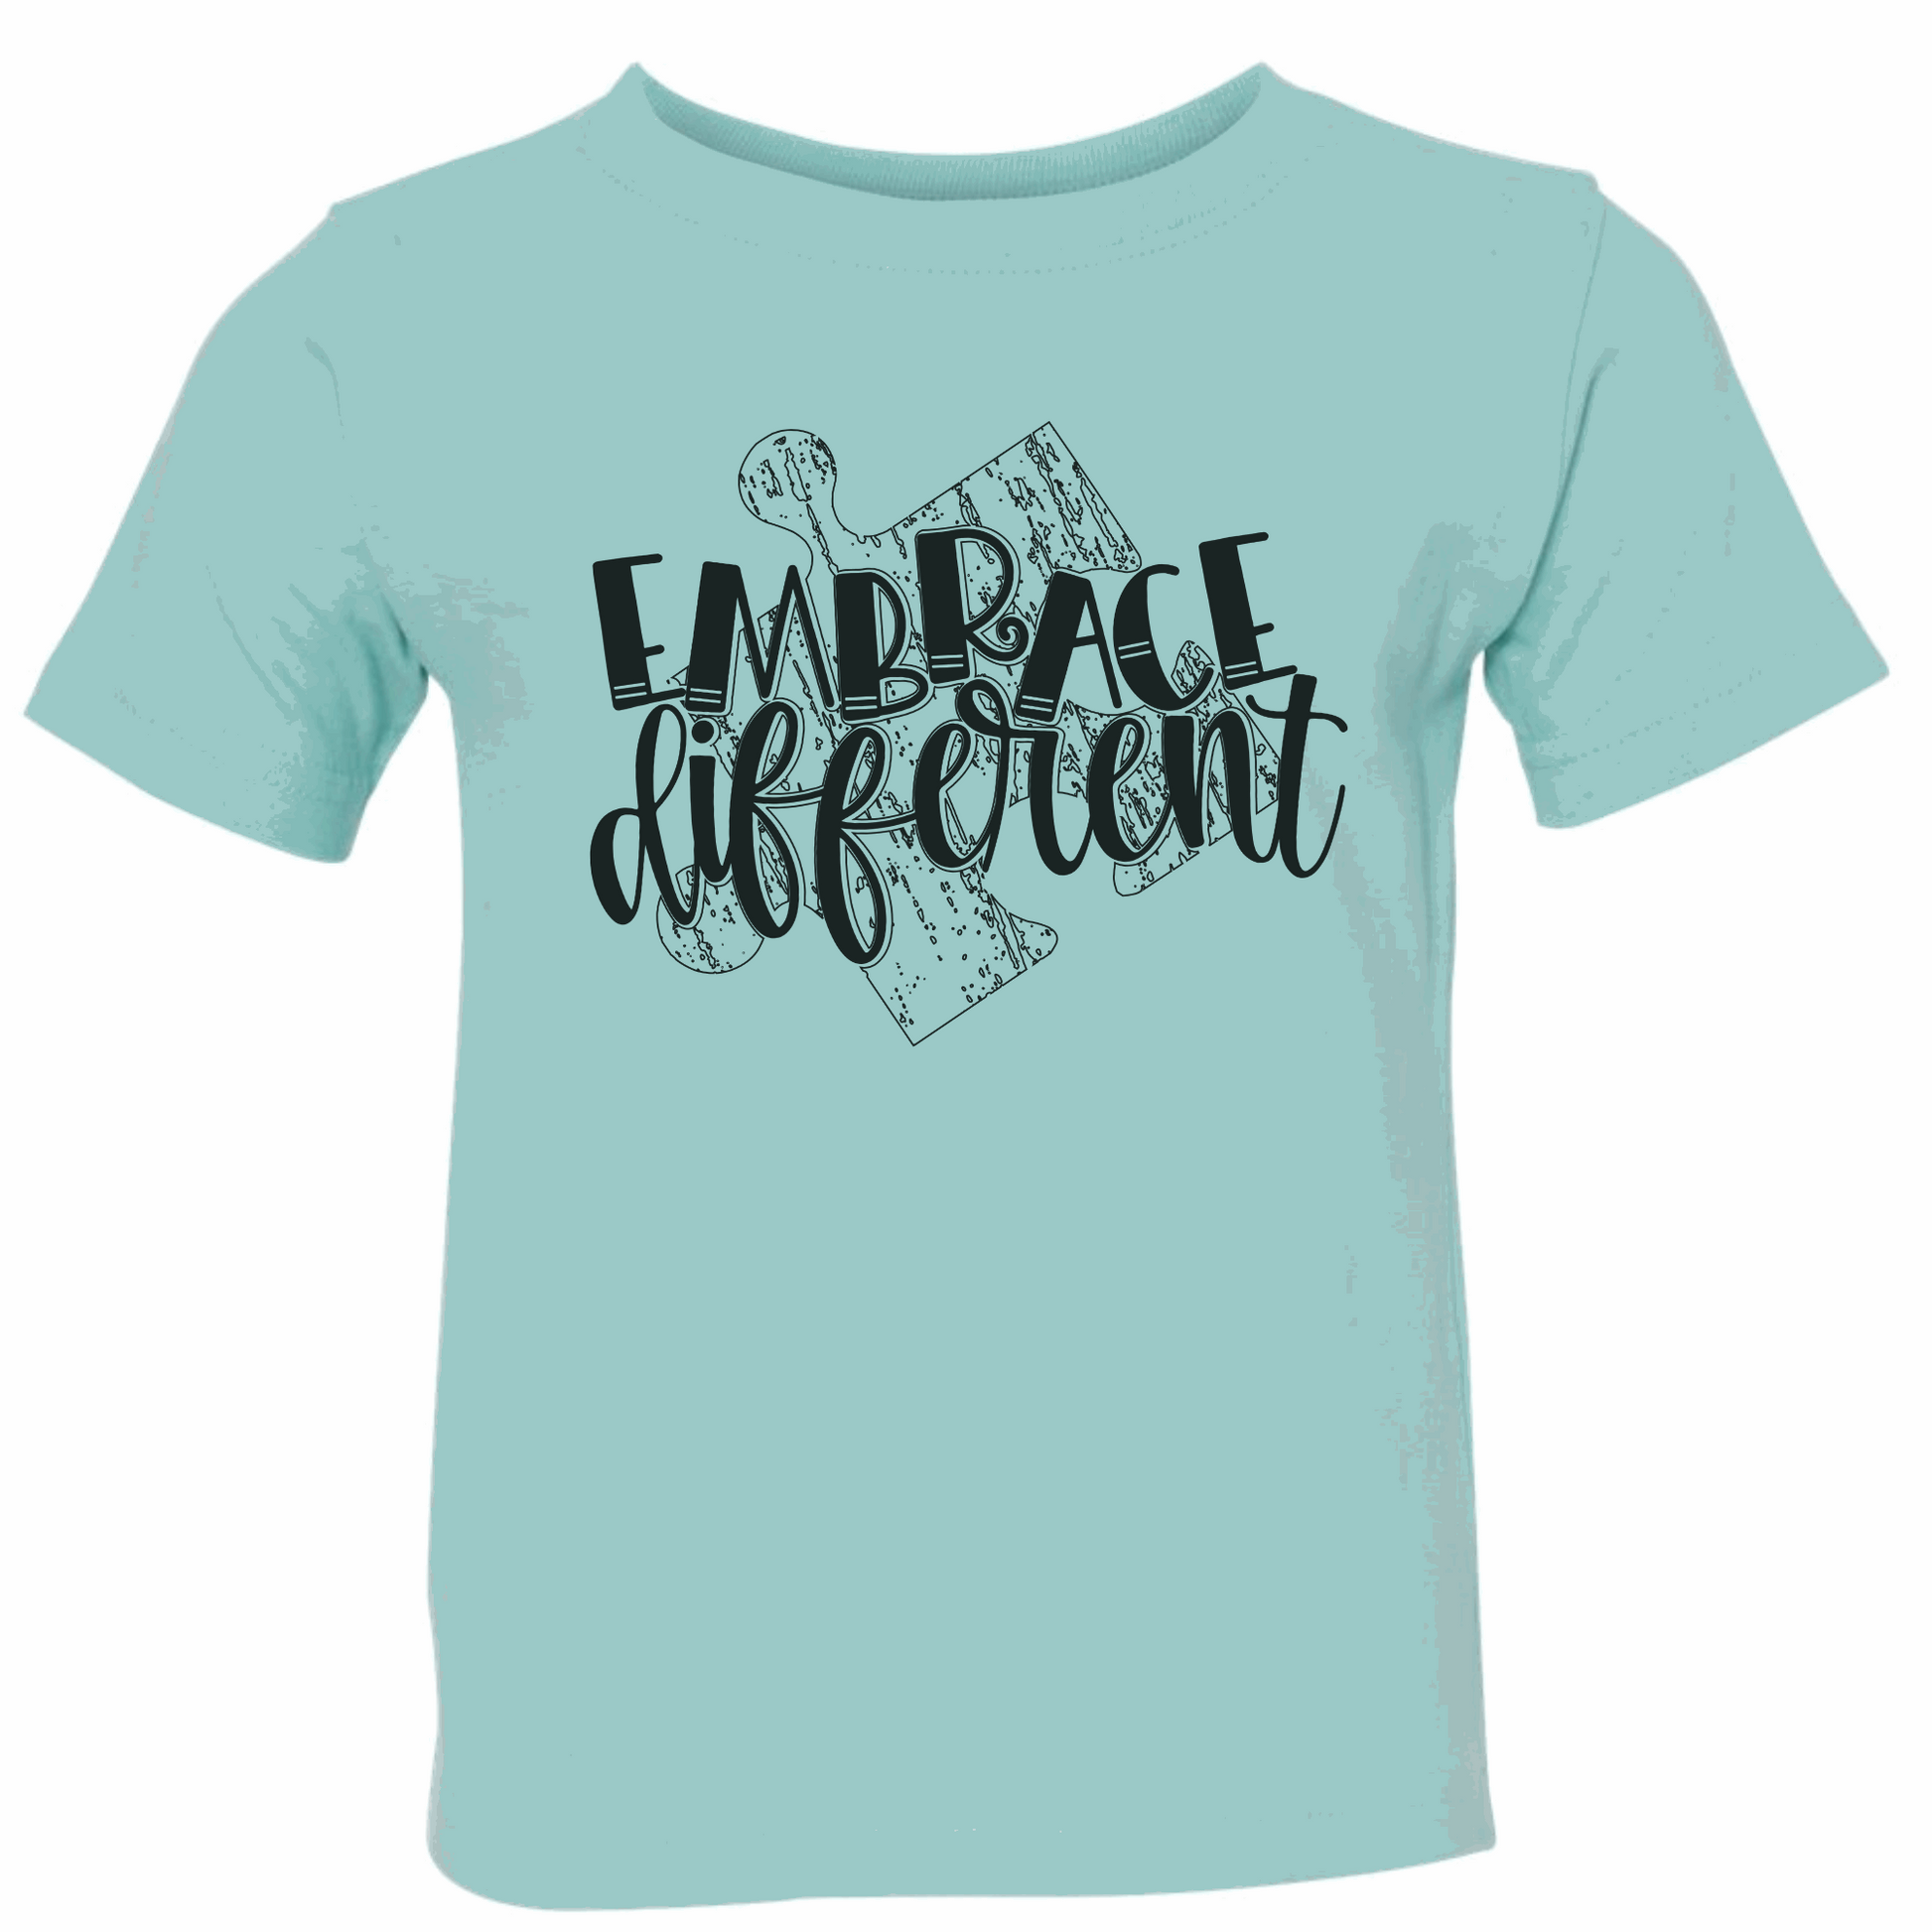 EMBRACE DIFFERENT (Black) Tee